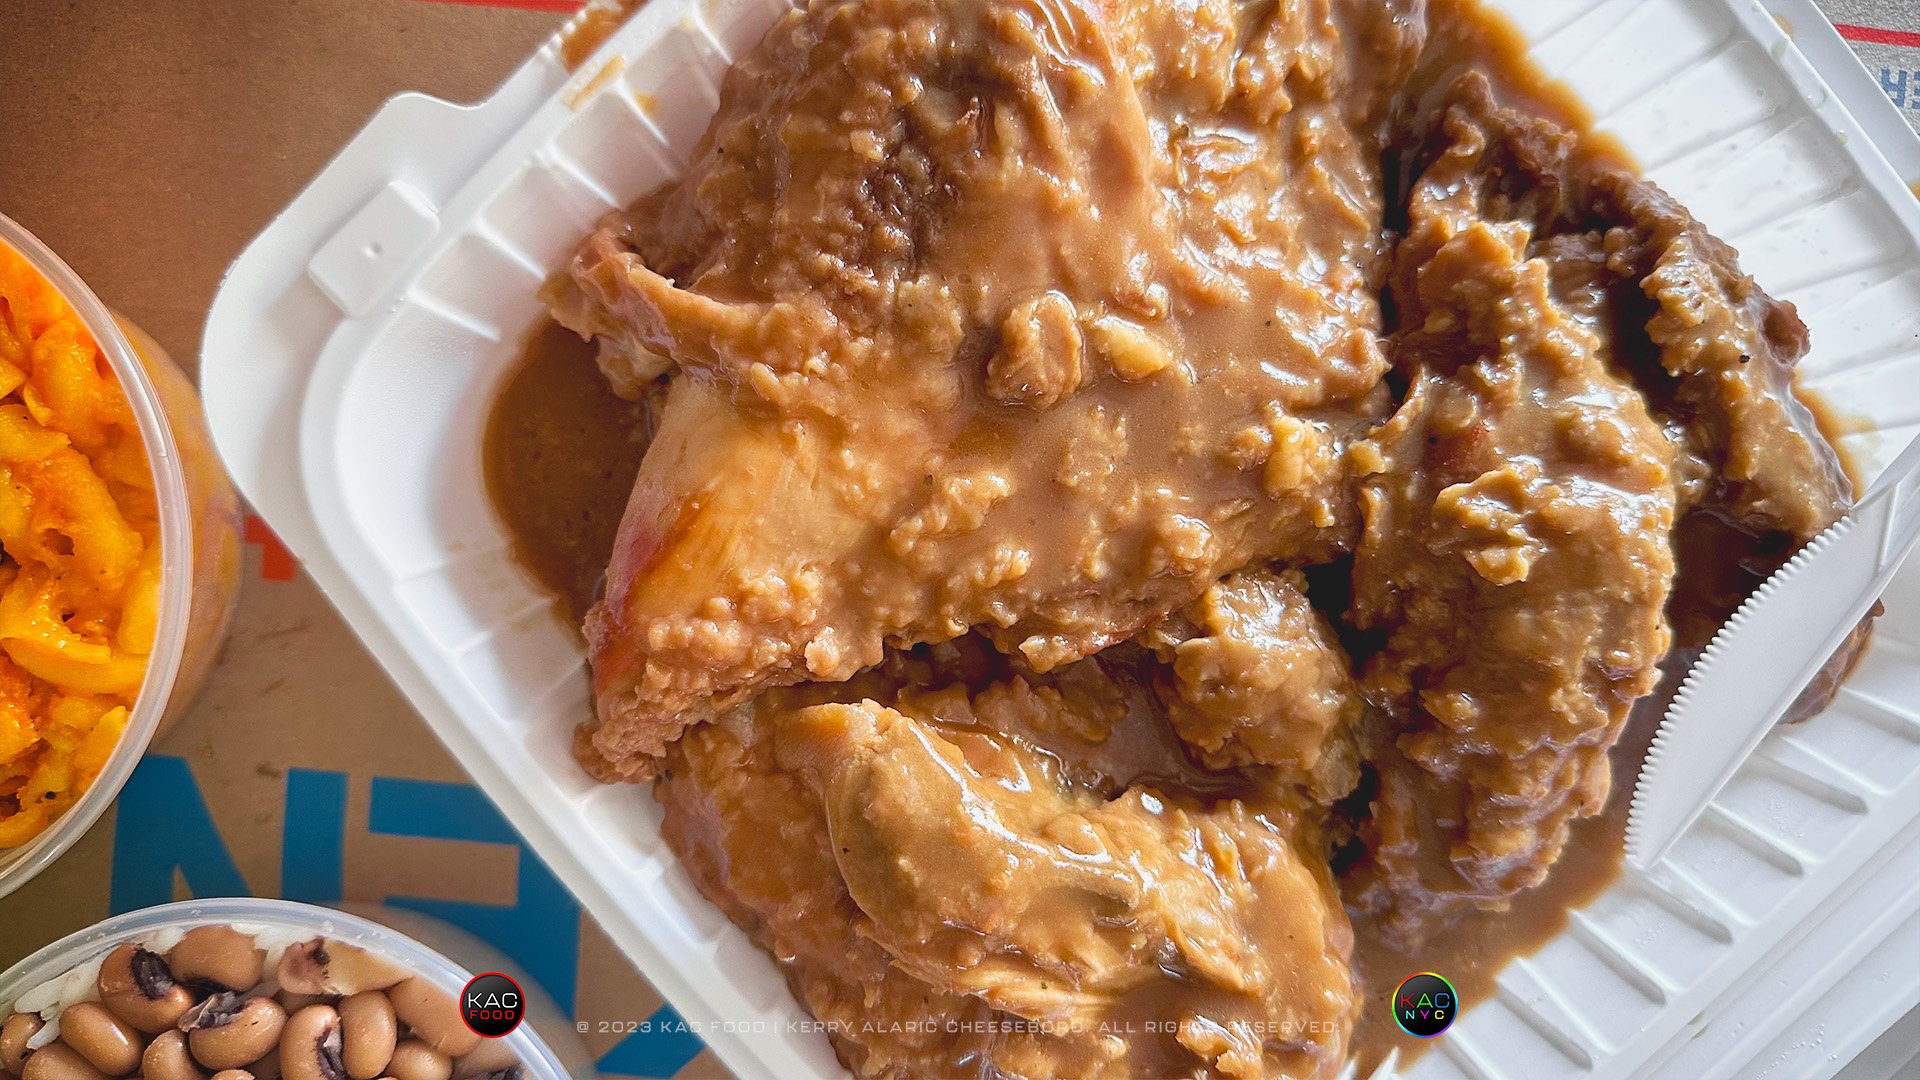 kac_food-230819-charles-pan-fried-chicken-smothered-fried-chicken-close-up-1-1920-hor.jpg